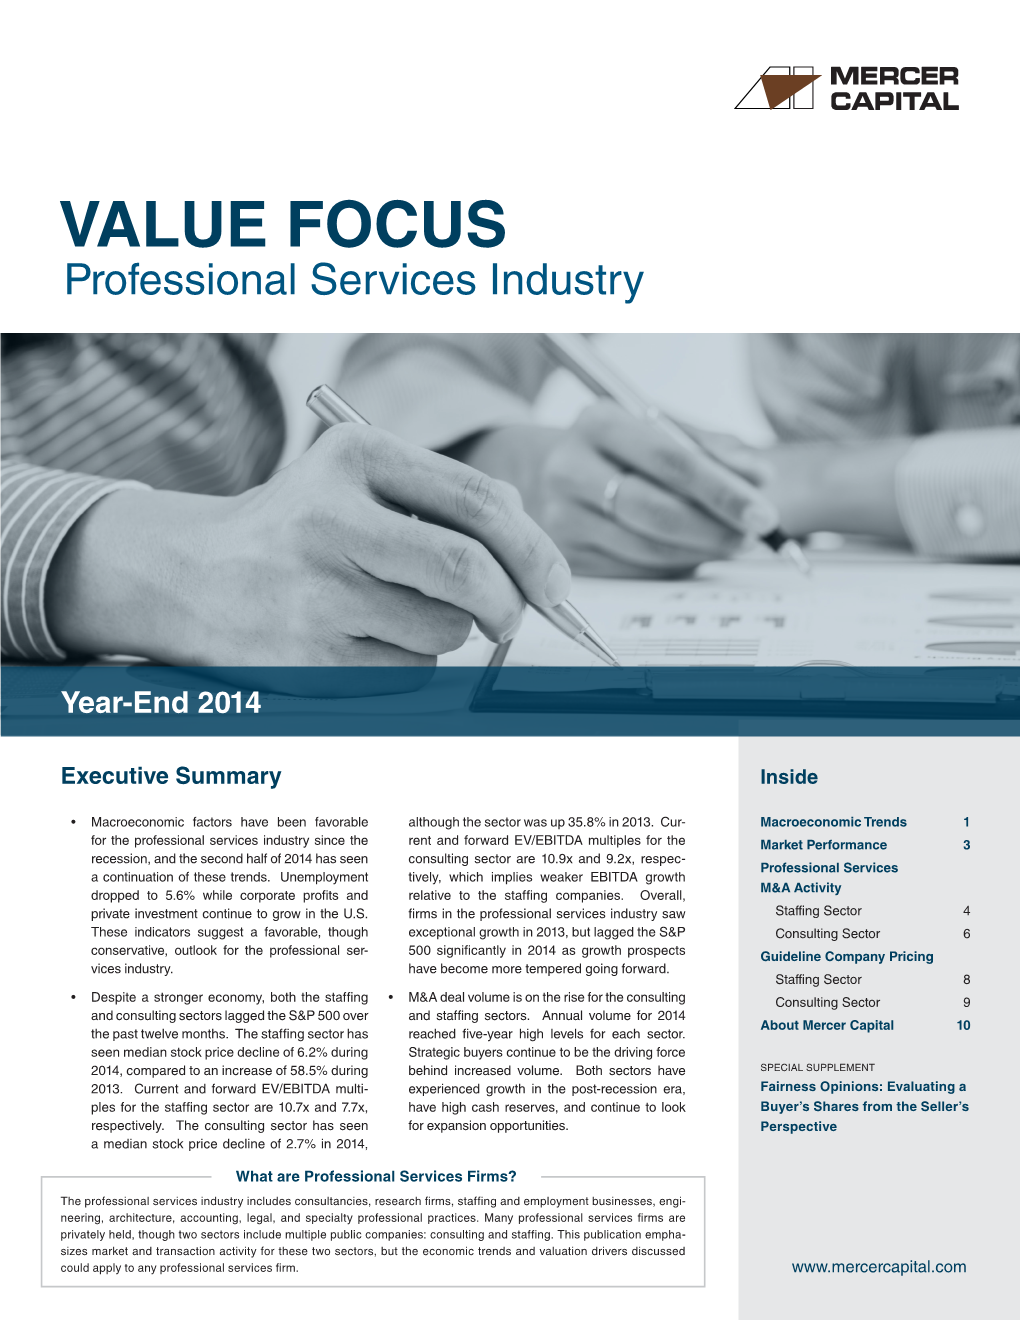 VALUE FOCUS Professional Services Industry